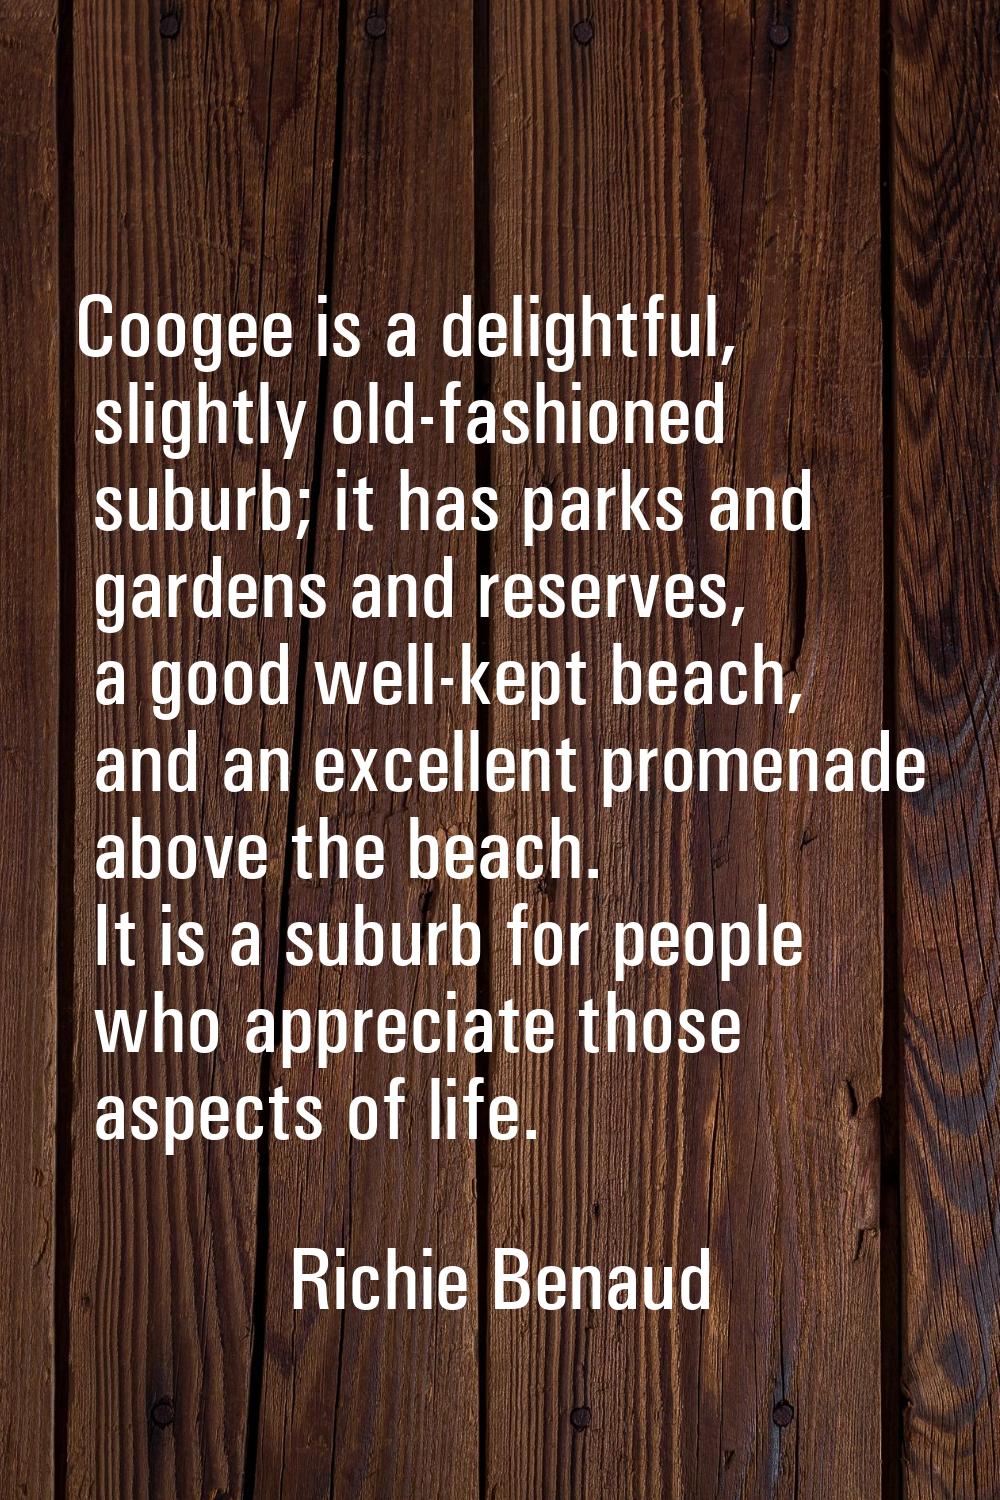 Coogee is a delightful, slightly old-fashioned suburb; it has parks and gardens and reserves, a goo